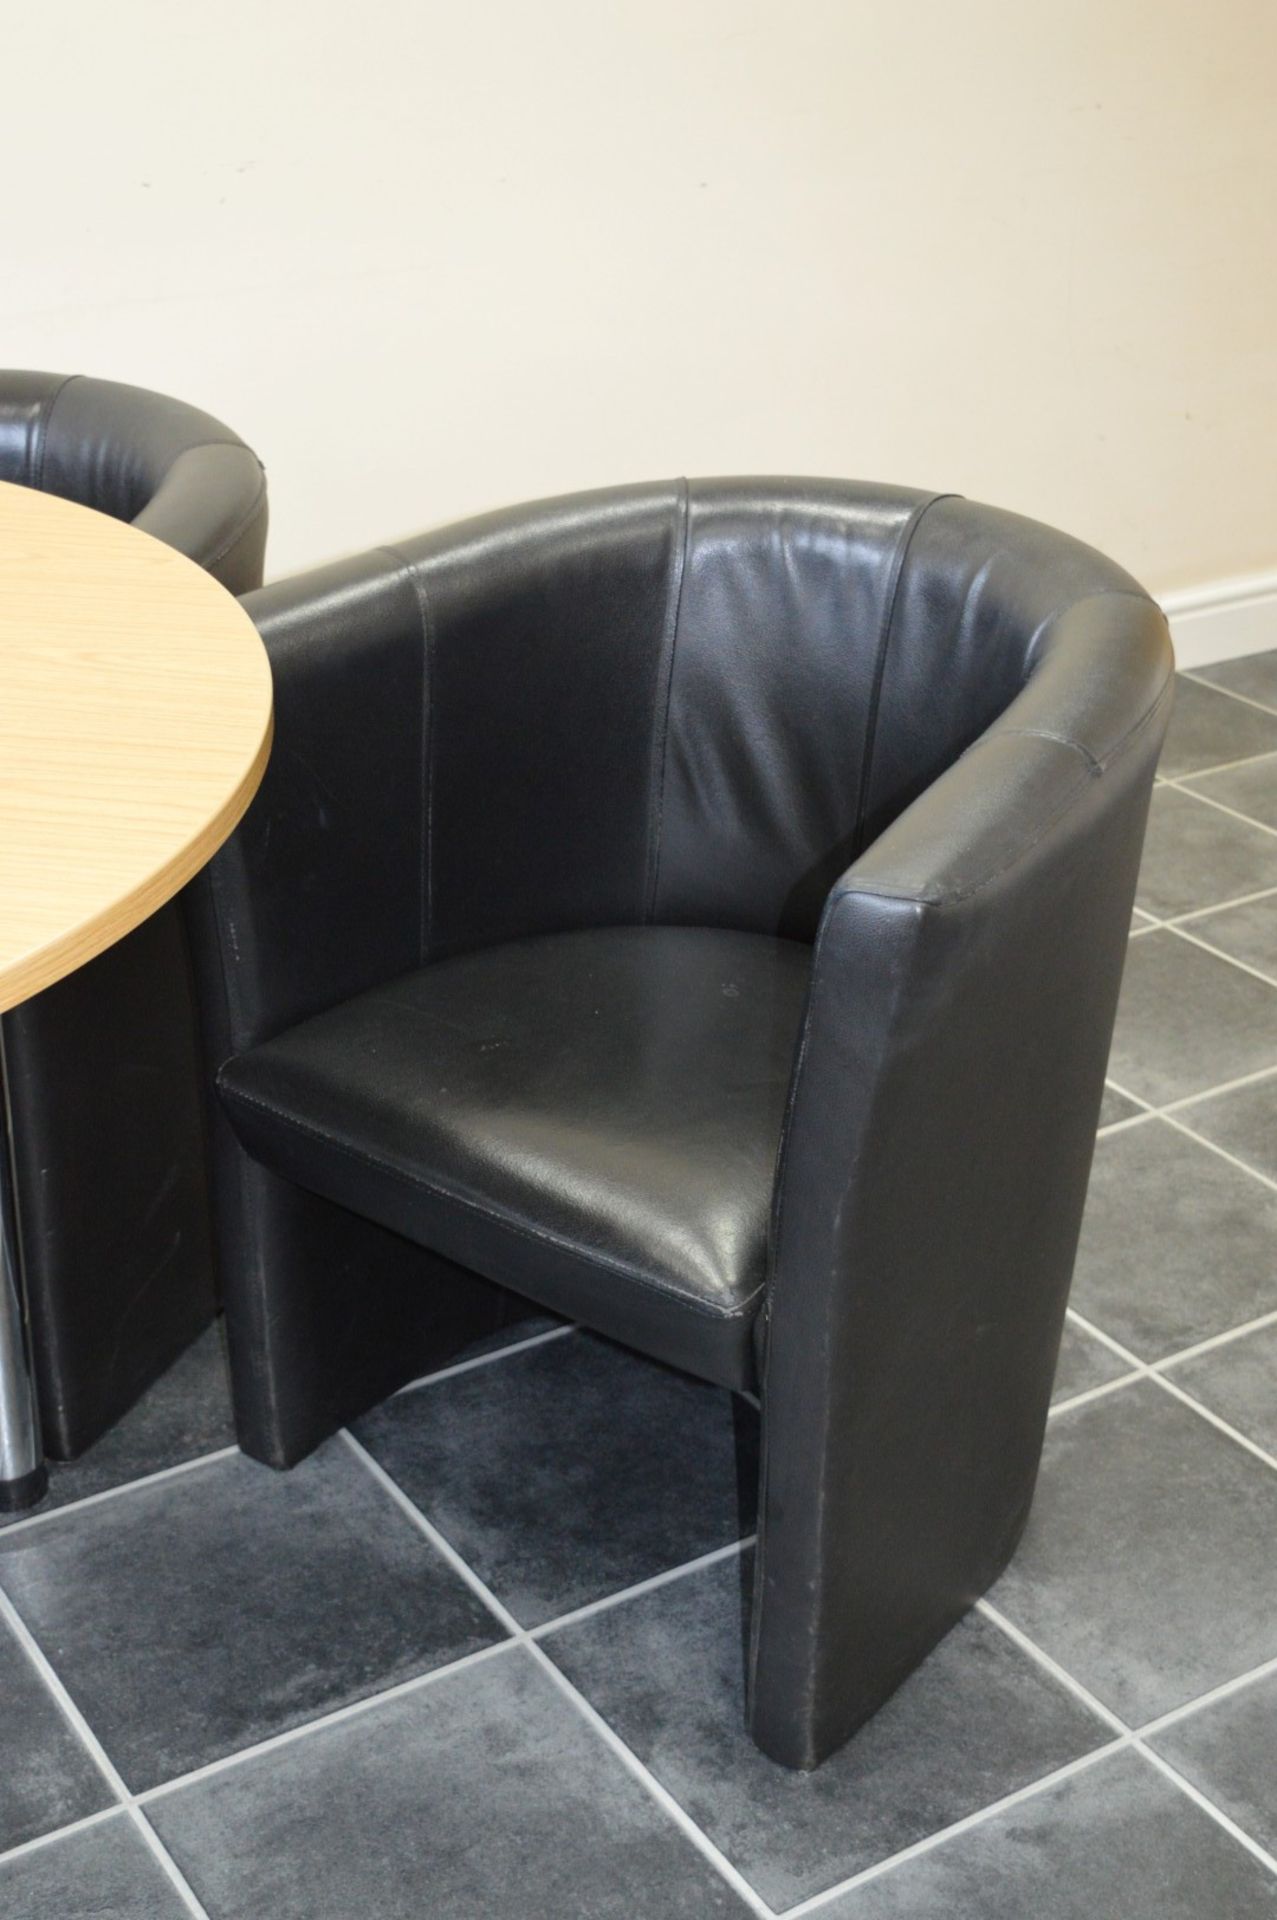 1 x Canteen Table With Four Faux Leather Tub Chairs - Table Size H74 x W120 cms - Ideal For Staff - Image 4 of 7